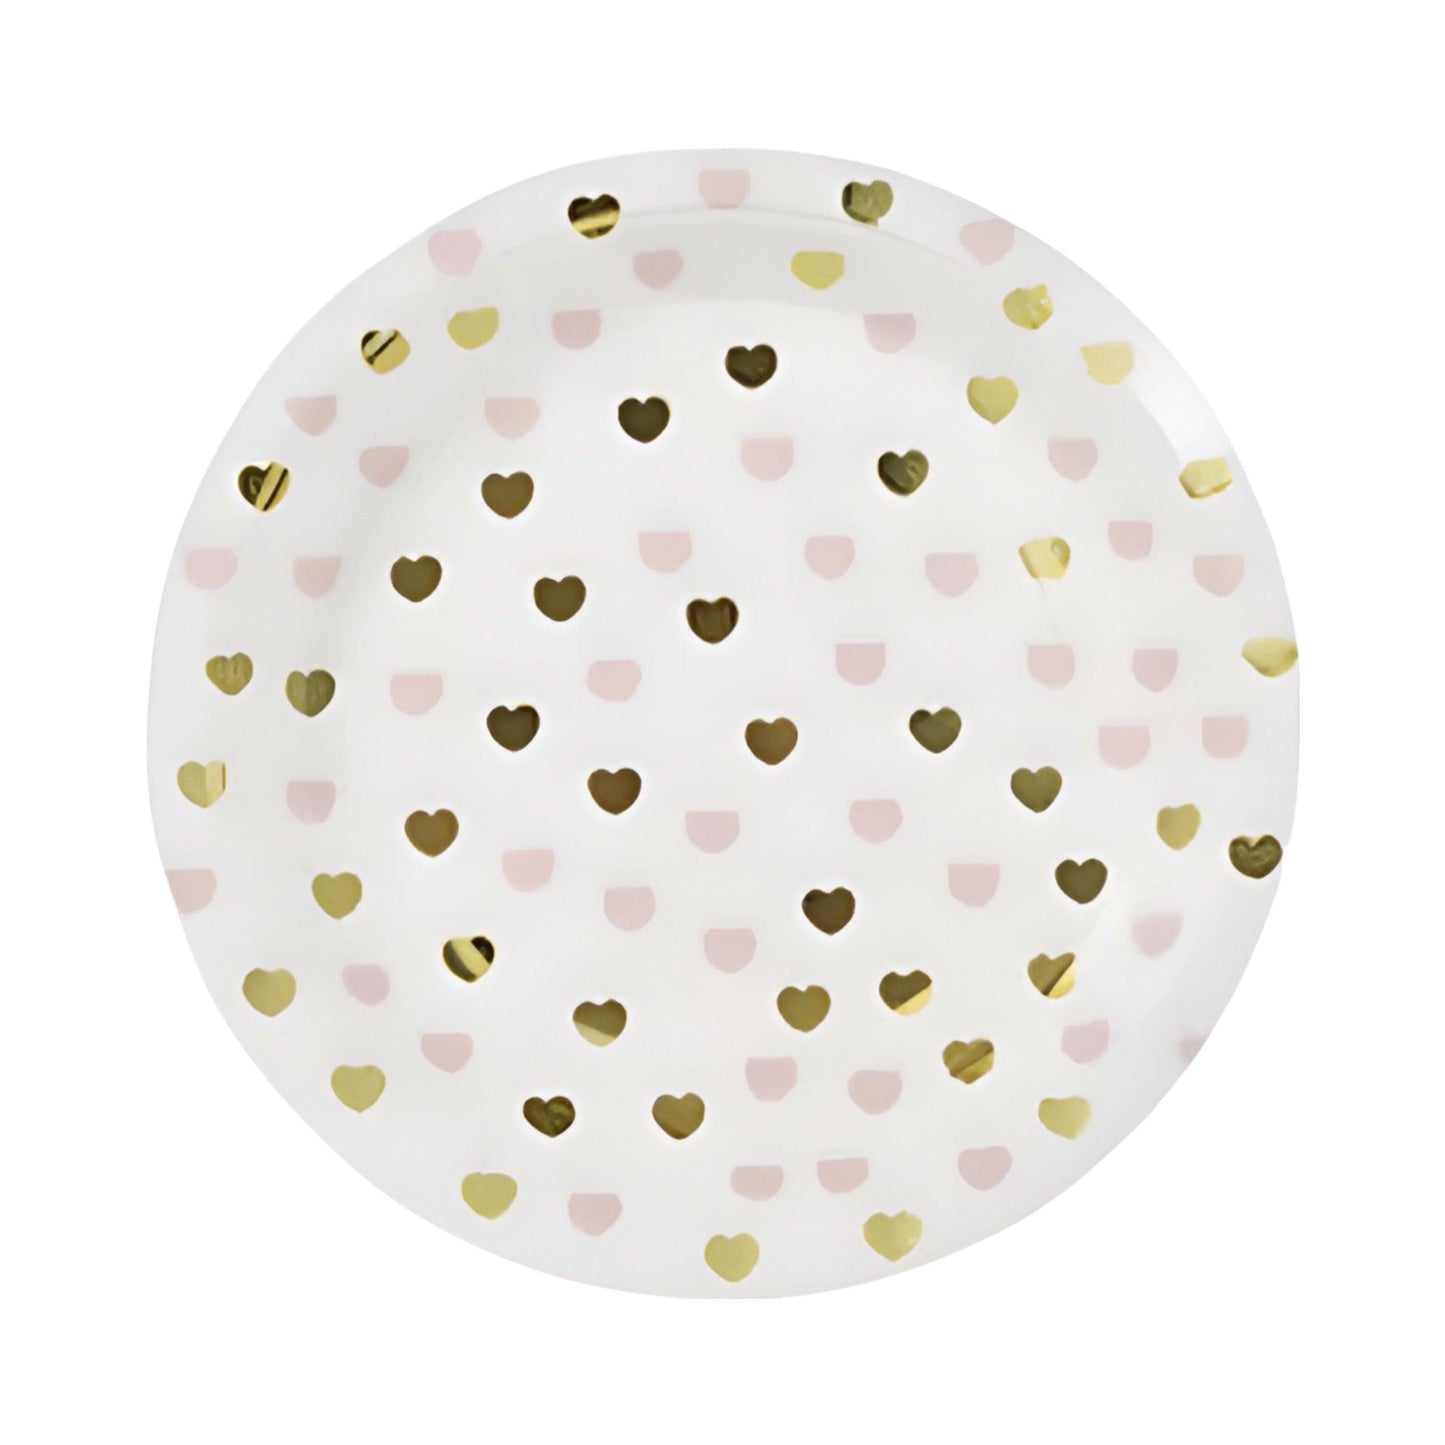 Heart Pattern  round Party Plates with Pink & Gold sparkle hearts on white background